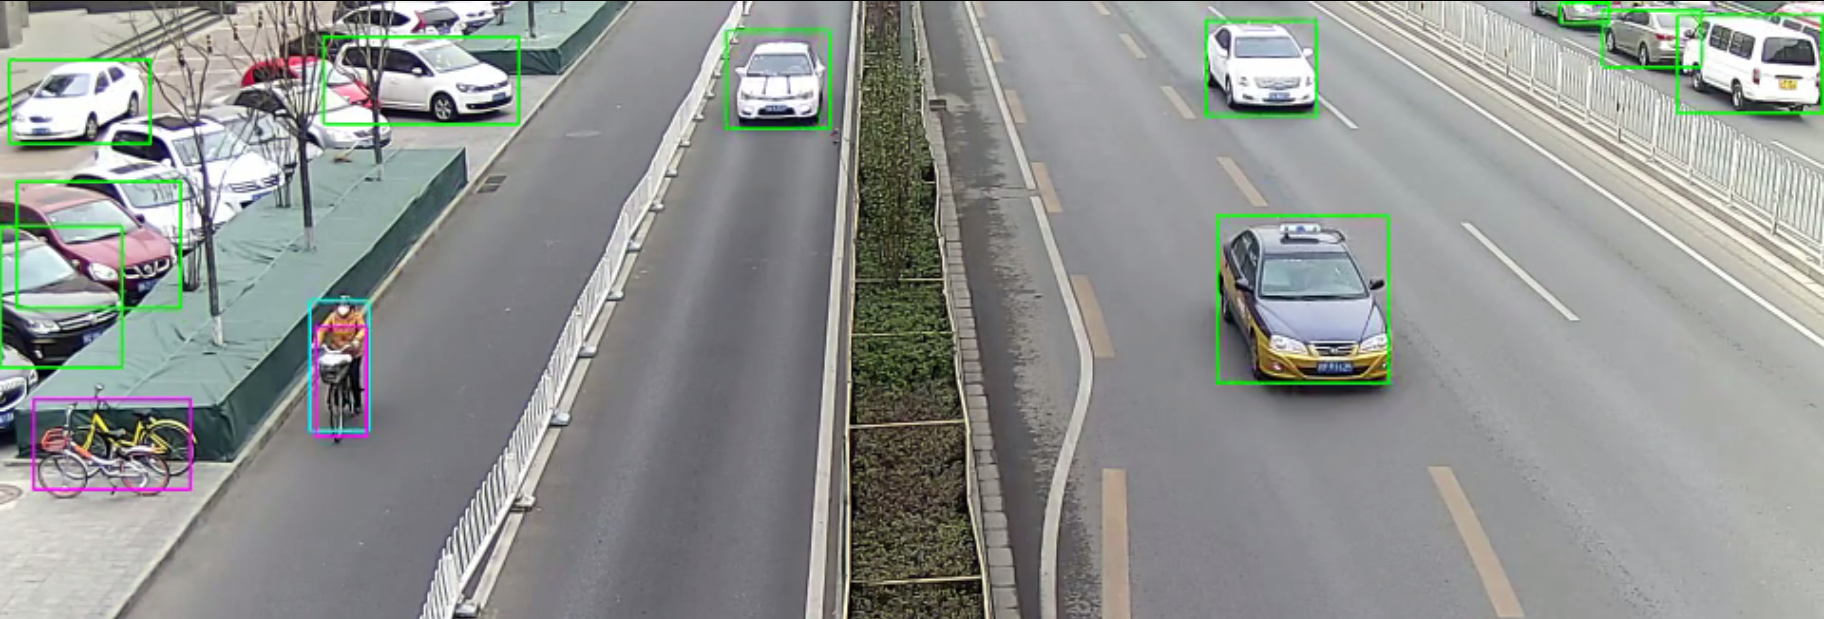 _images/person-vehicle-bike-detection-2001.png